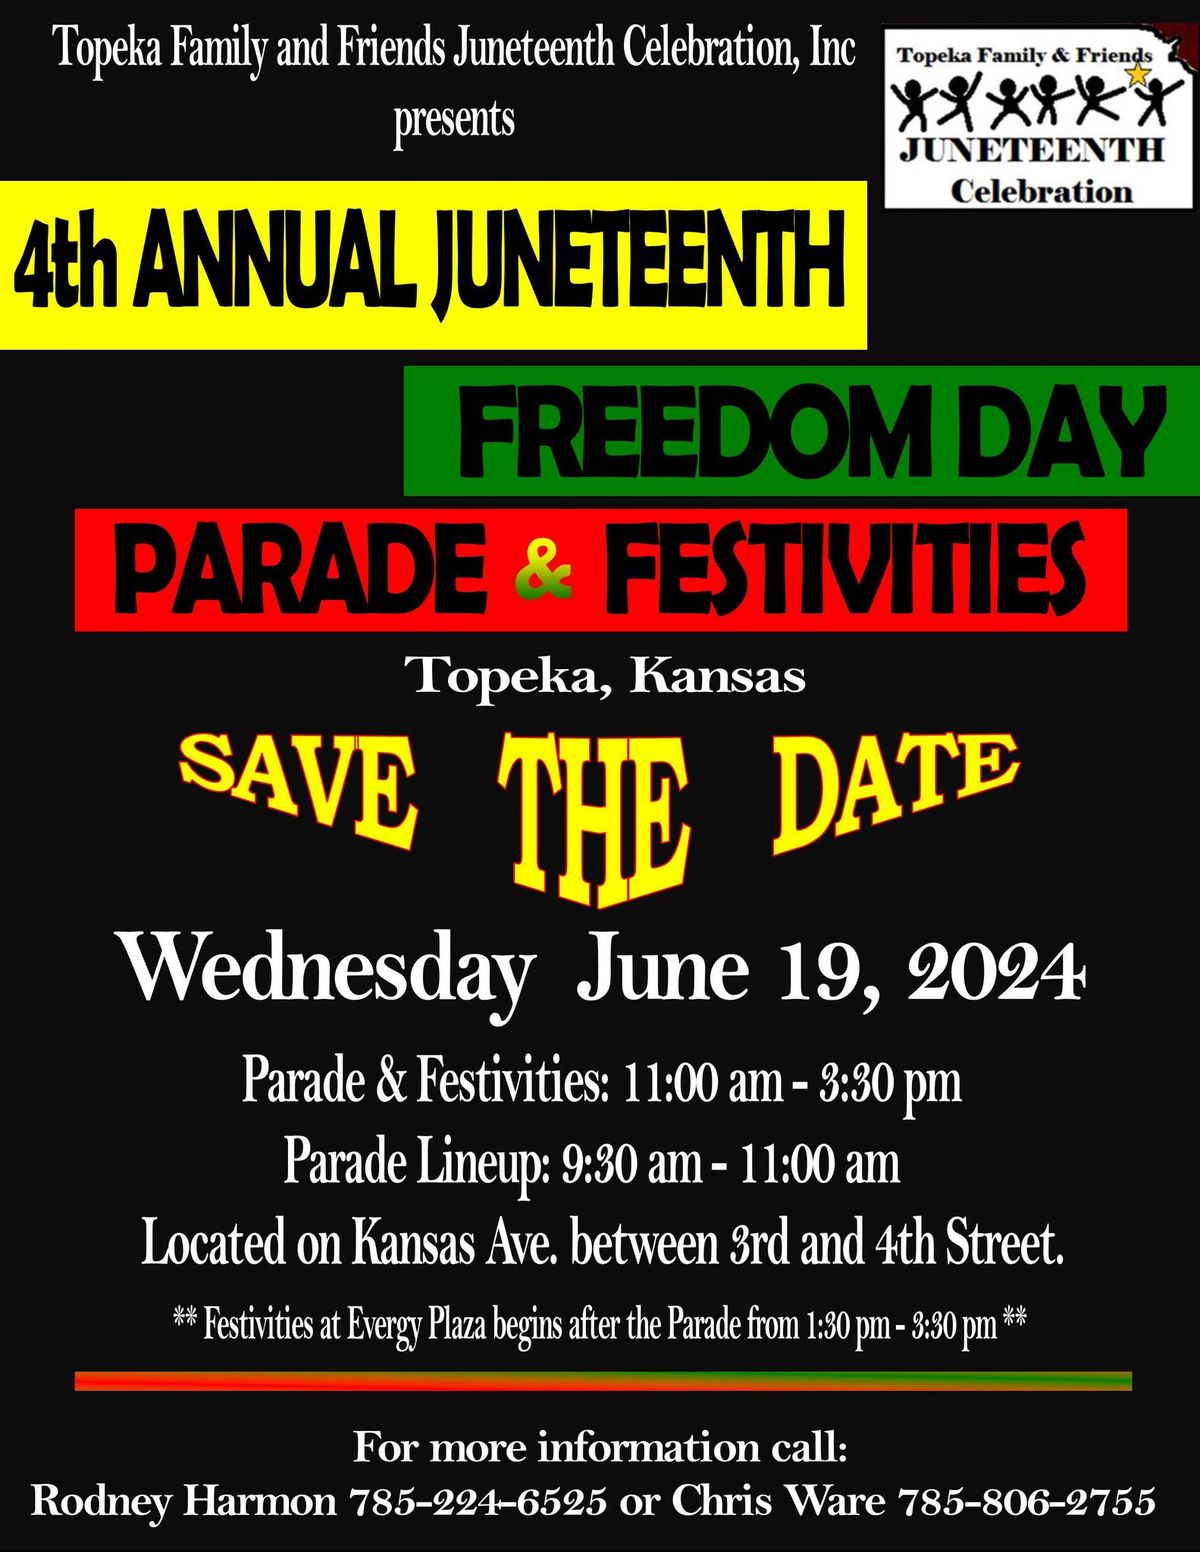 Topeka Family and Friends Celebration 4th Annual Juneteenth Freedom Day Parade and Festivities